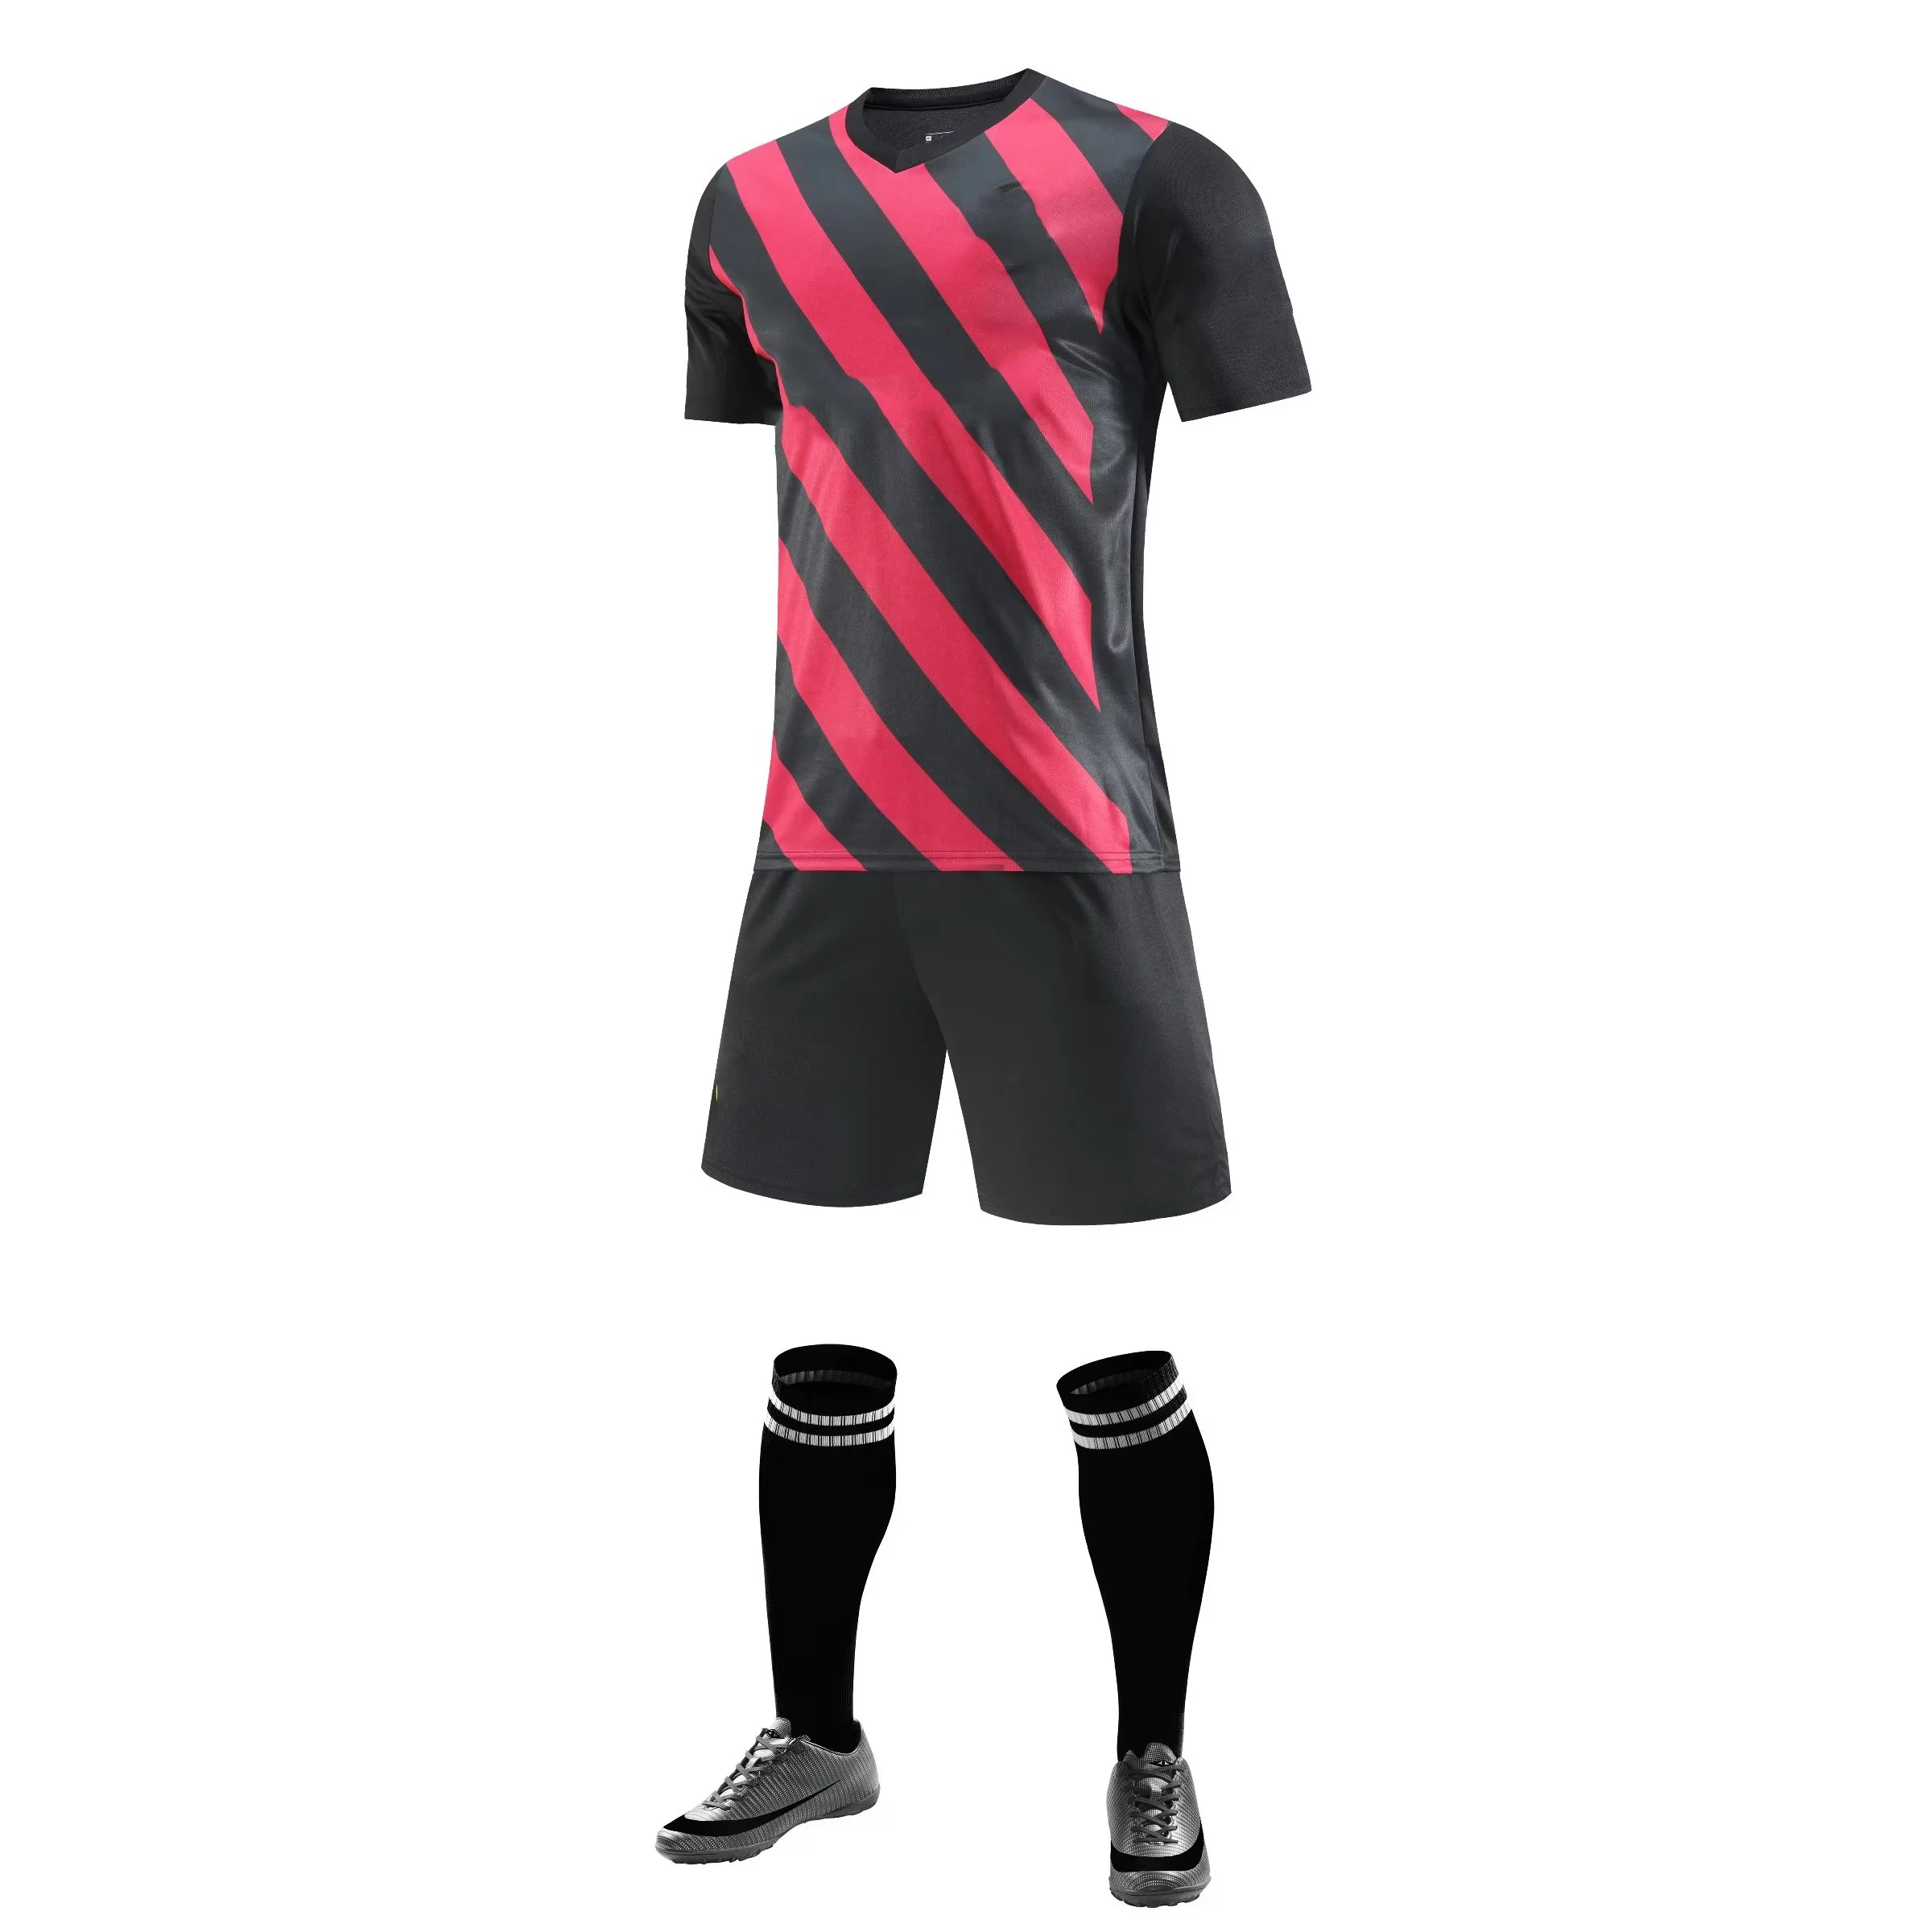 Experience the ultimate in soccer apparel with the 2023 New Design Ignis Soccer Uniforms. These custom football soccer jerseys